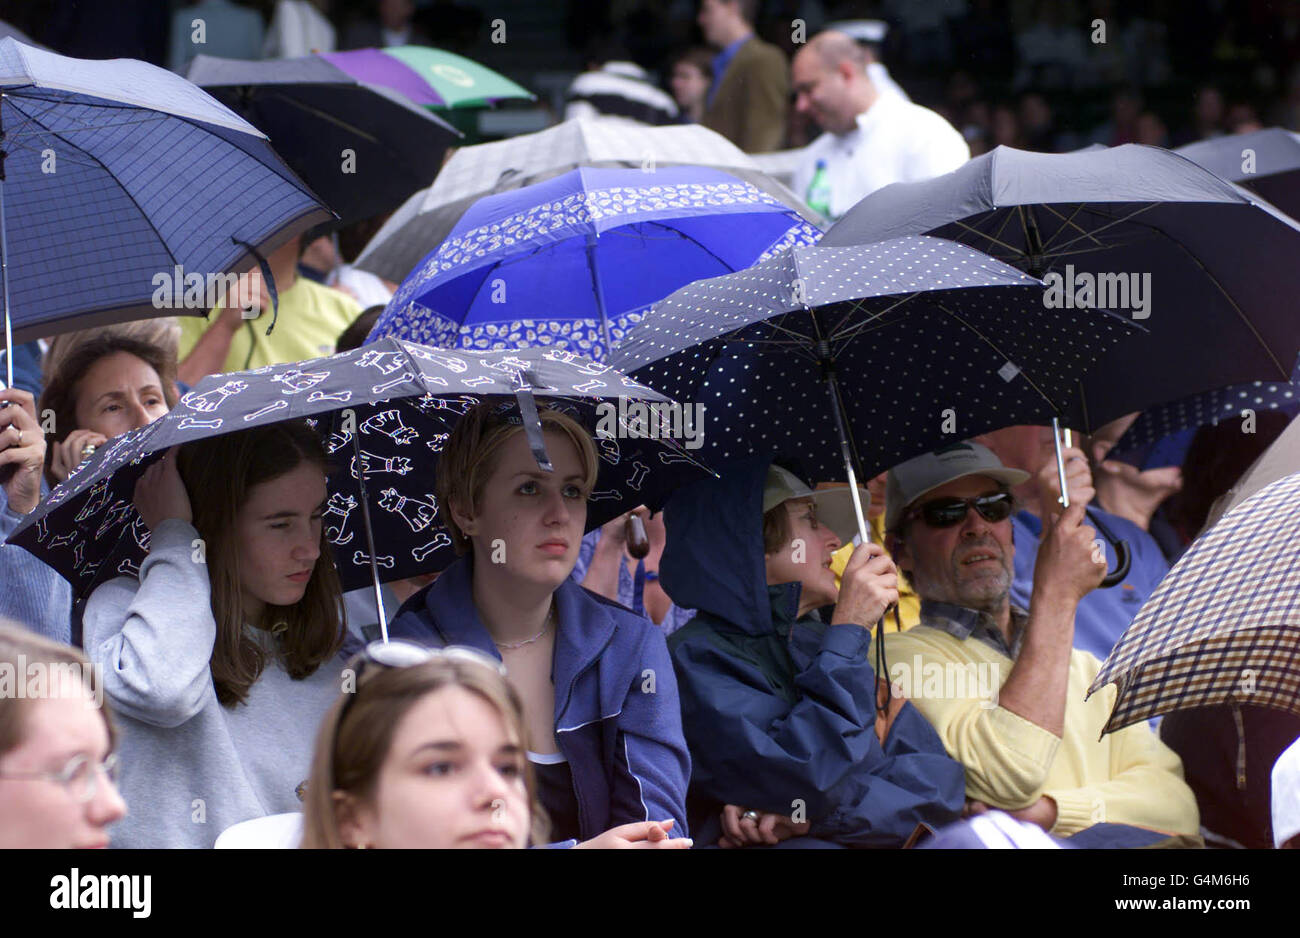 No Commercial Use: Tennis fans on Centre Court take cover under umbrella's as rain stops play during the Tim Henman v Jim Courier match at the Wimbledon Tennis Championships. Stock Photo